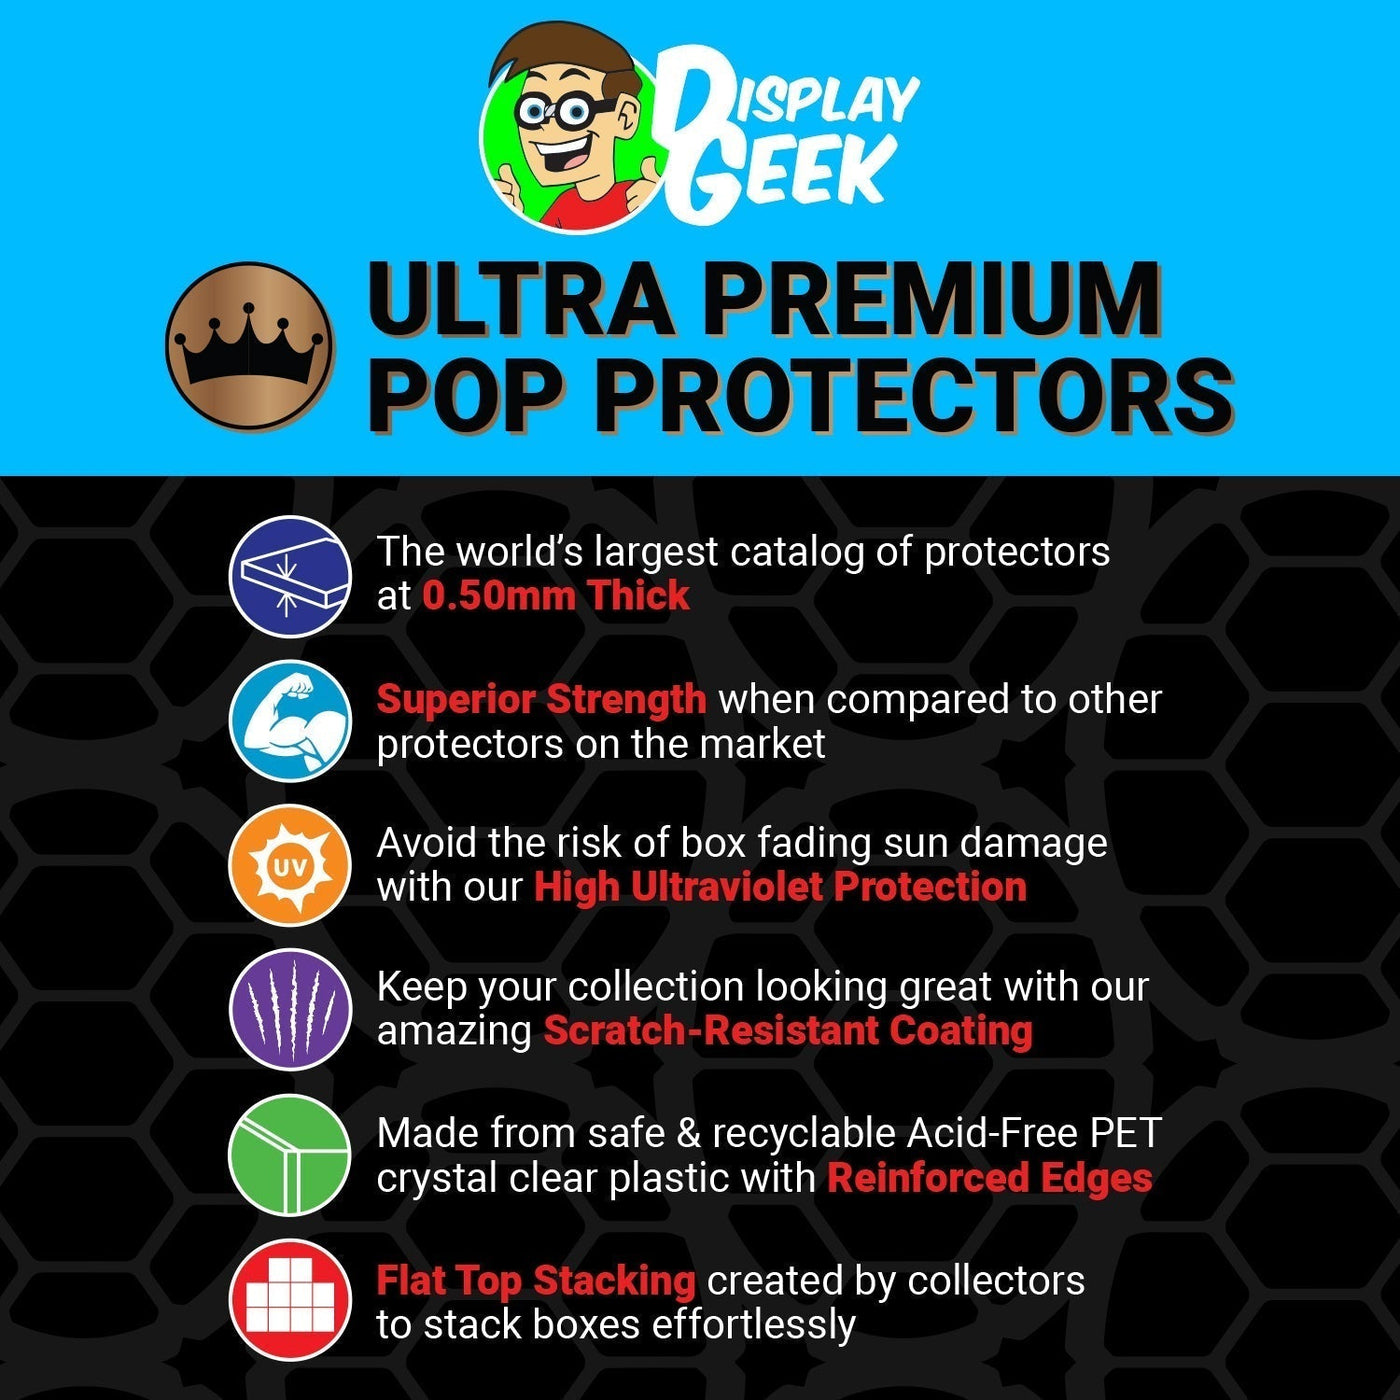 Pop Protector for 6 inch Iron Throne NYCC #38 Super Funko Pop on The Protector Guide App by Display Geek